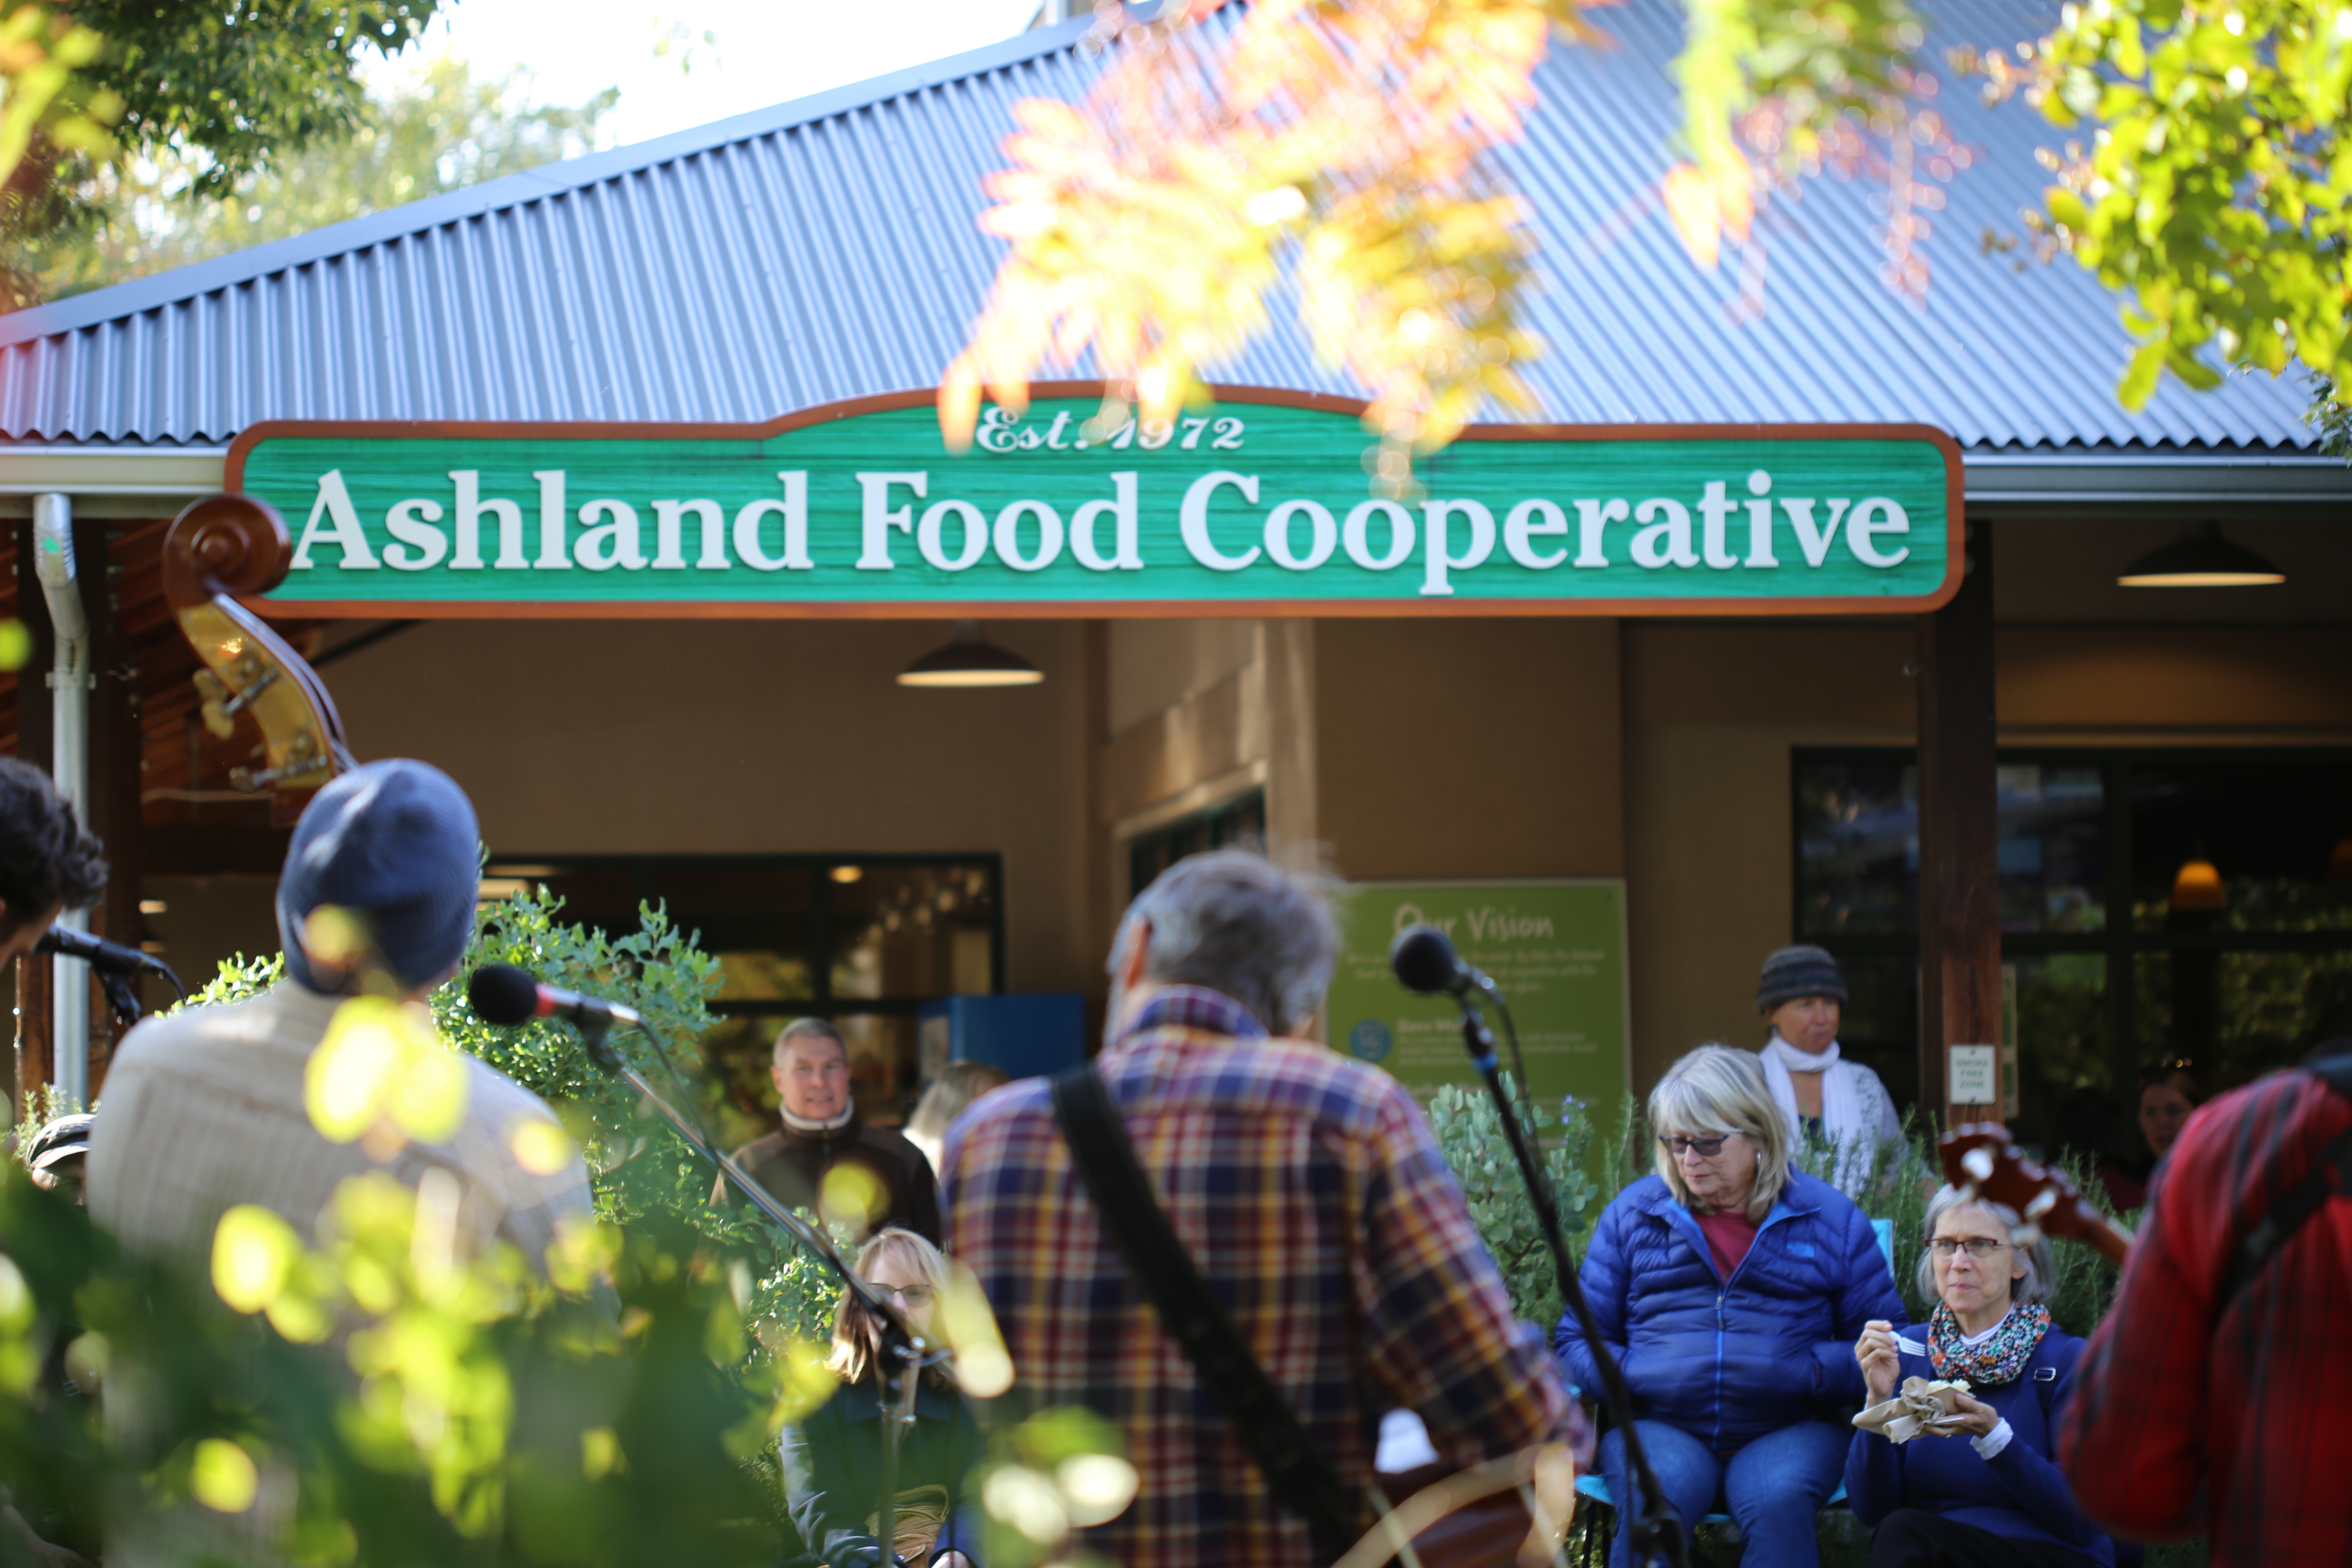 Owners and Shoppers Enjoying Music in front of the Ashland Food Co-op store in 2019